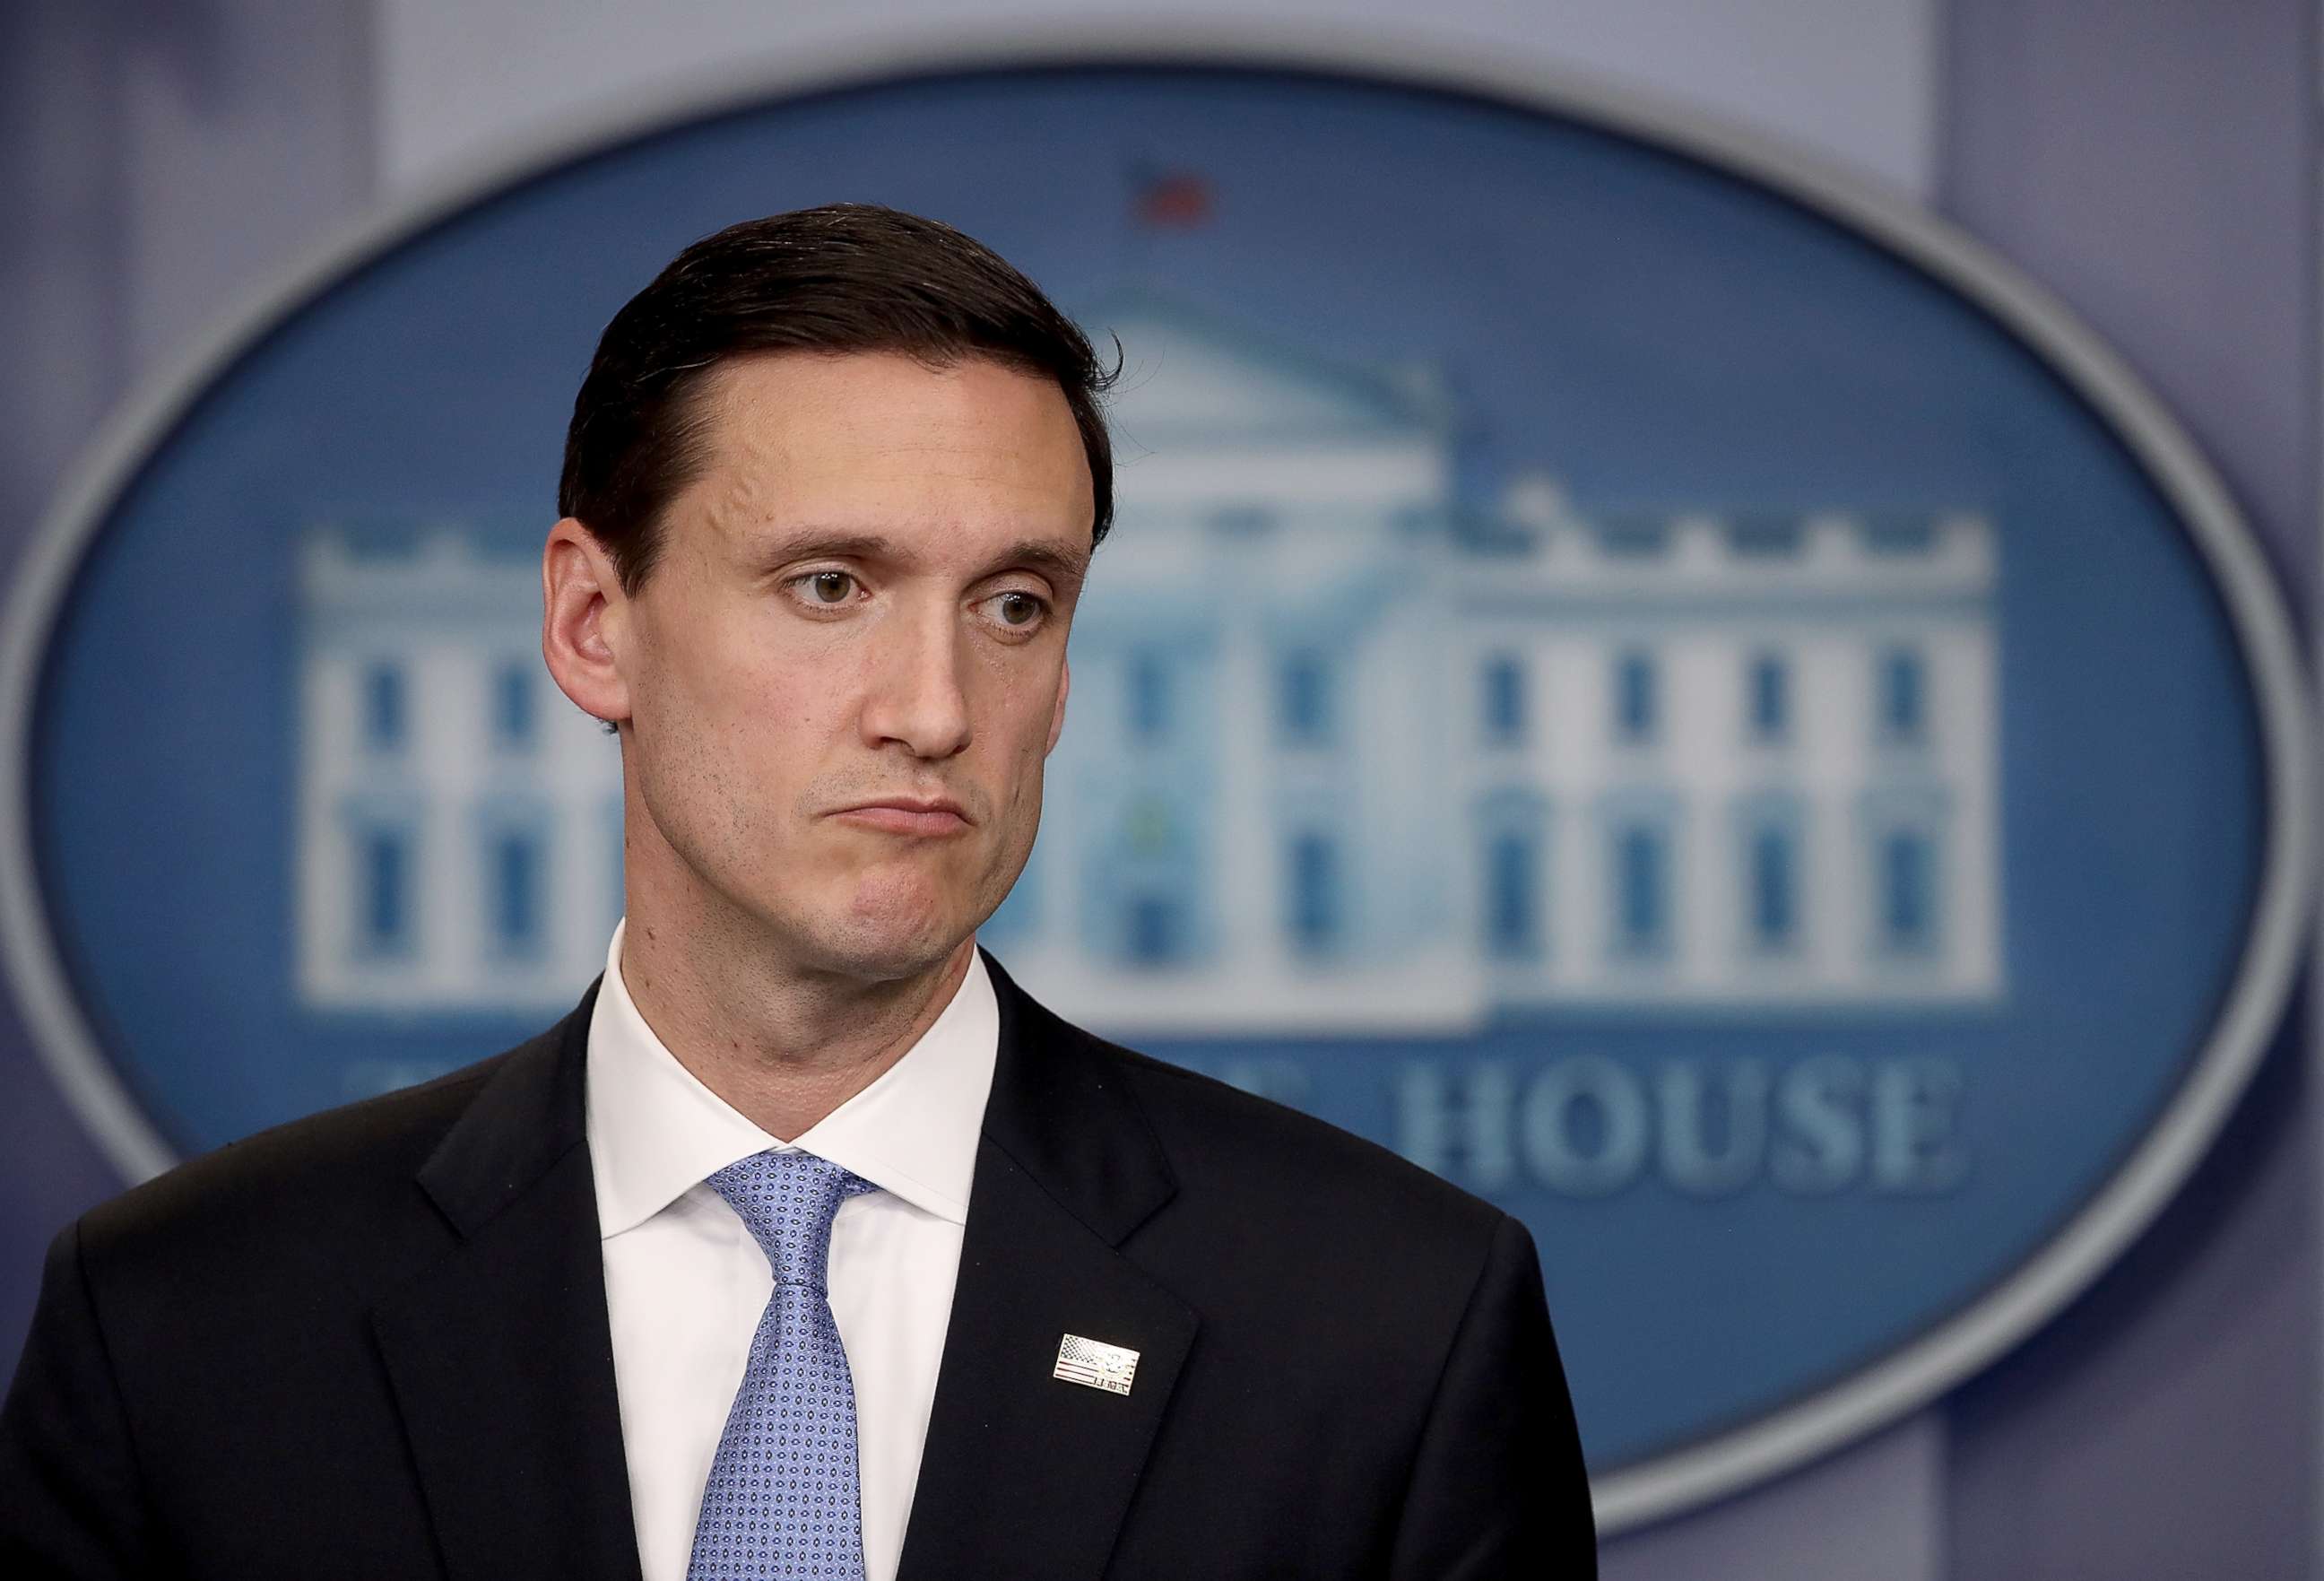 PHOTO: White House Homeland Security Advisor Tom Bossert answers questions during a White House briefing Sept. 11, 2017 in Washington, DC.